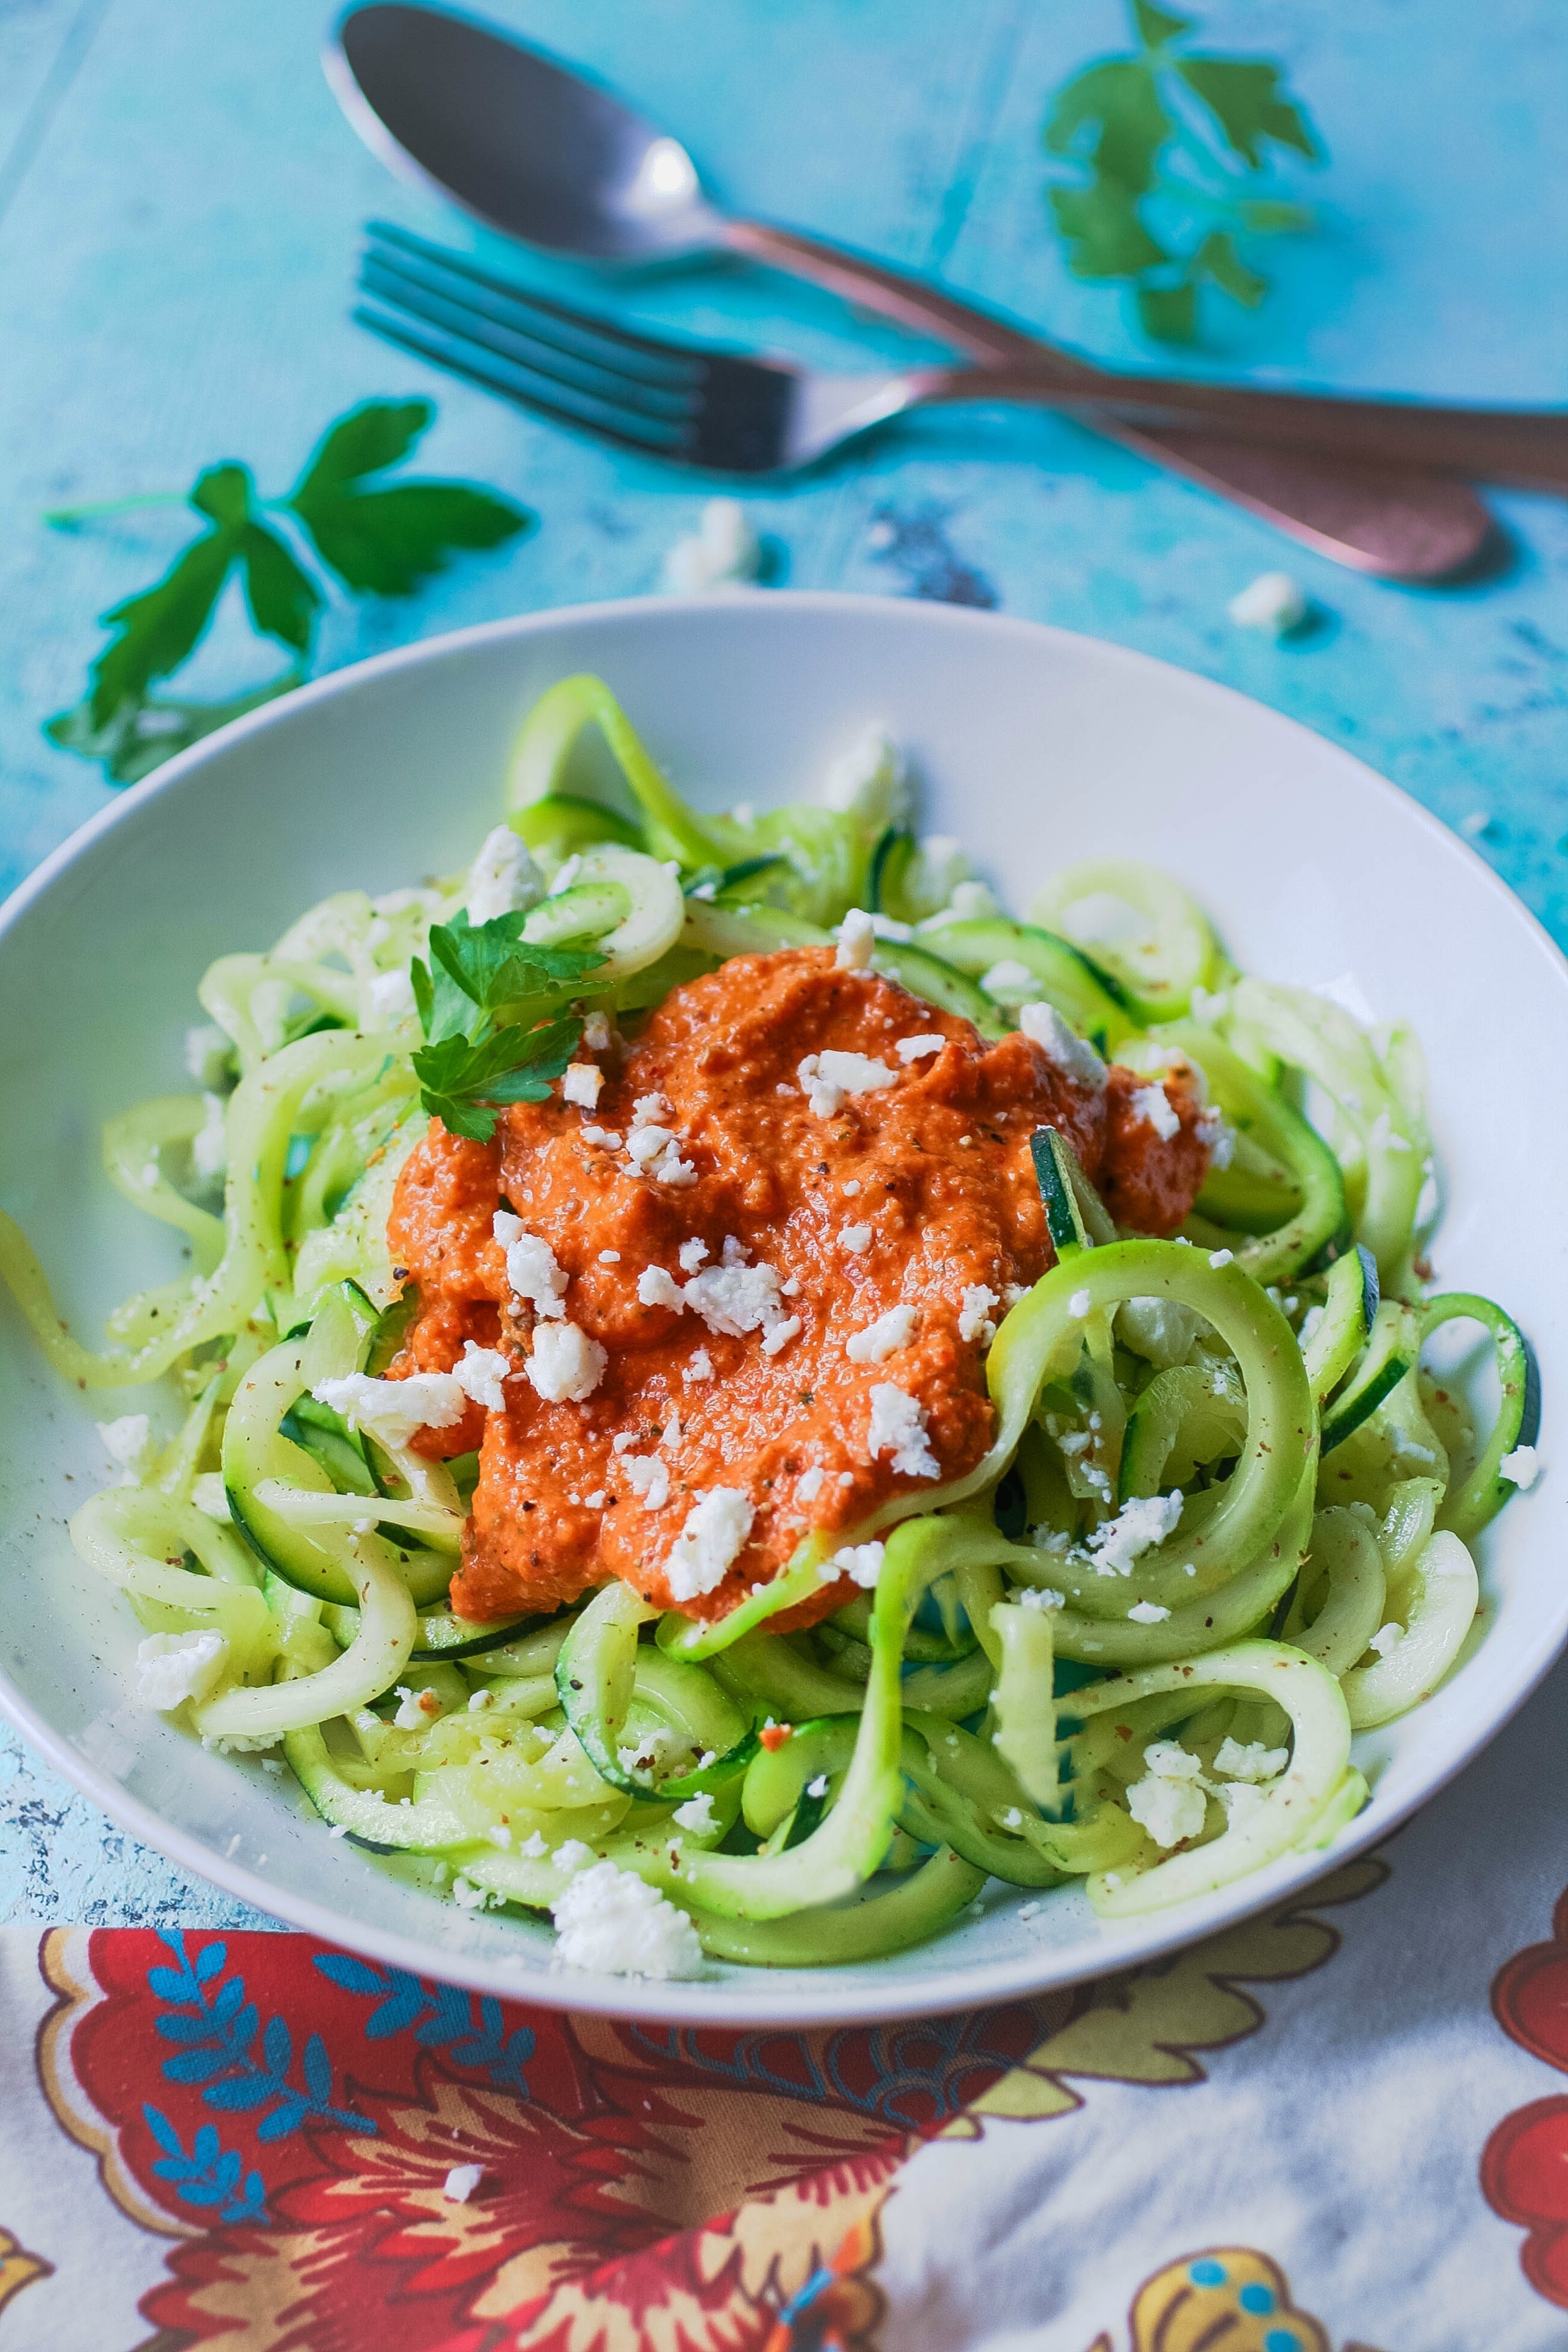 Low carb zoodles with Romesco sauce is a flavorful and easy-to-make dish! Low carb zoodles with Romesco sauce is so tasty!